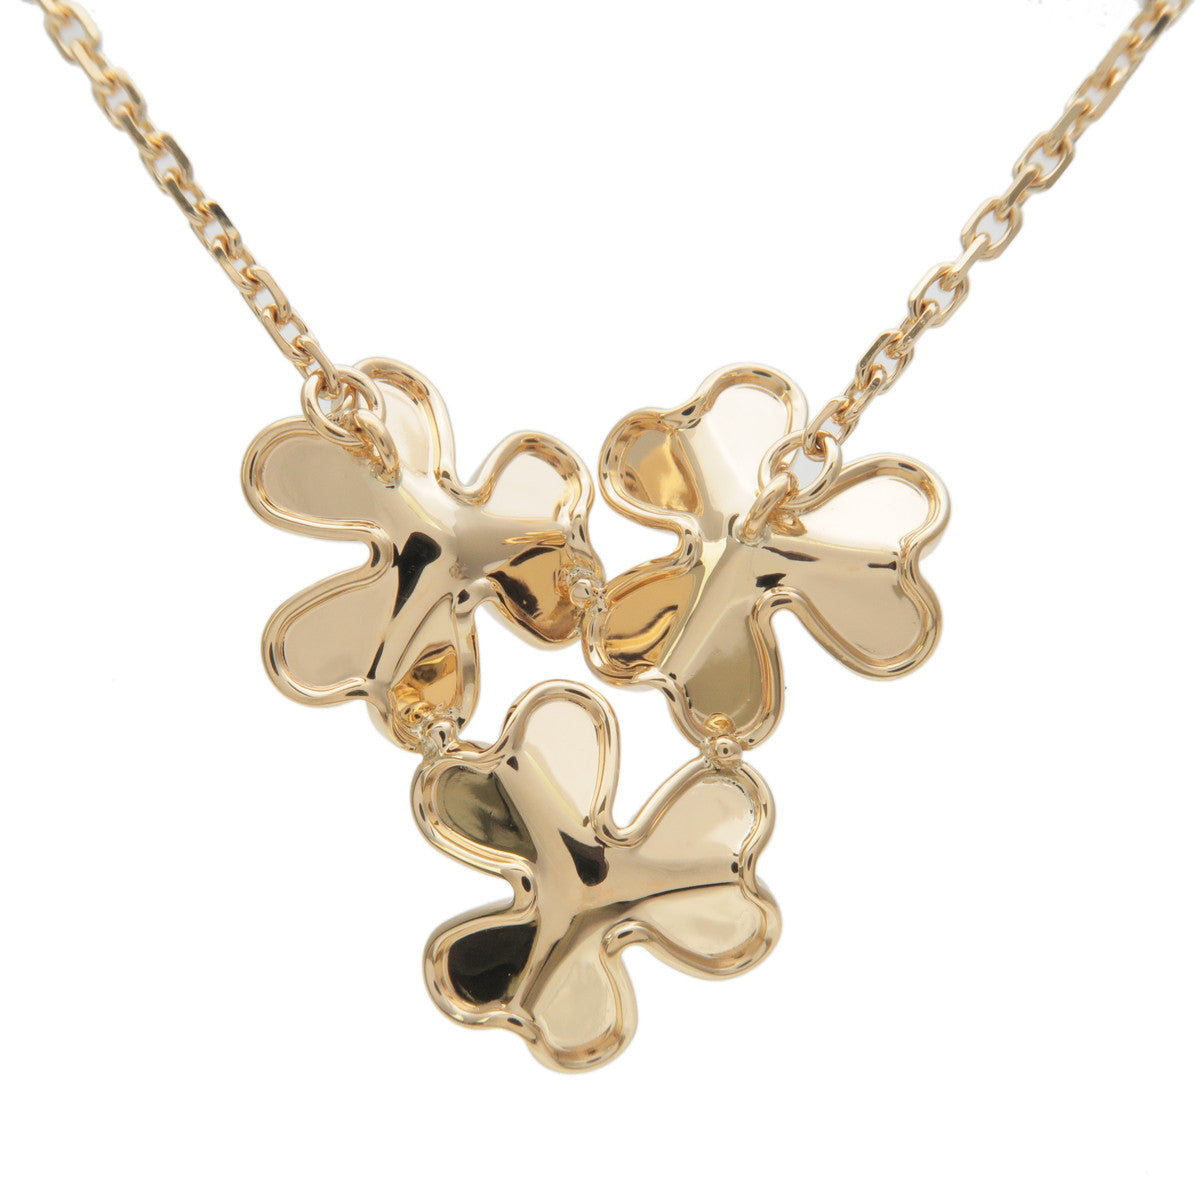 The Van Cleef Necklace You Need To See! - Fashion For Lunch